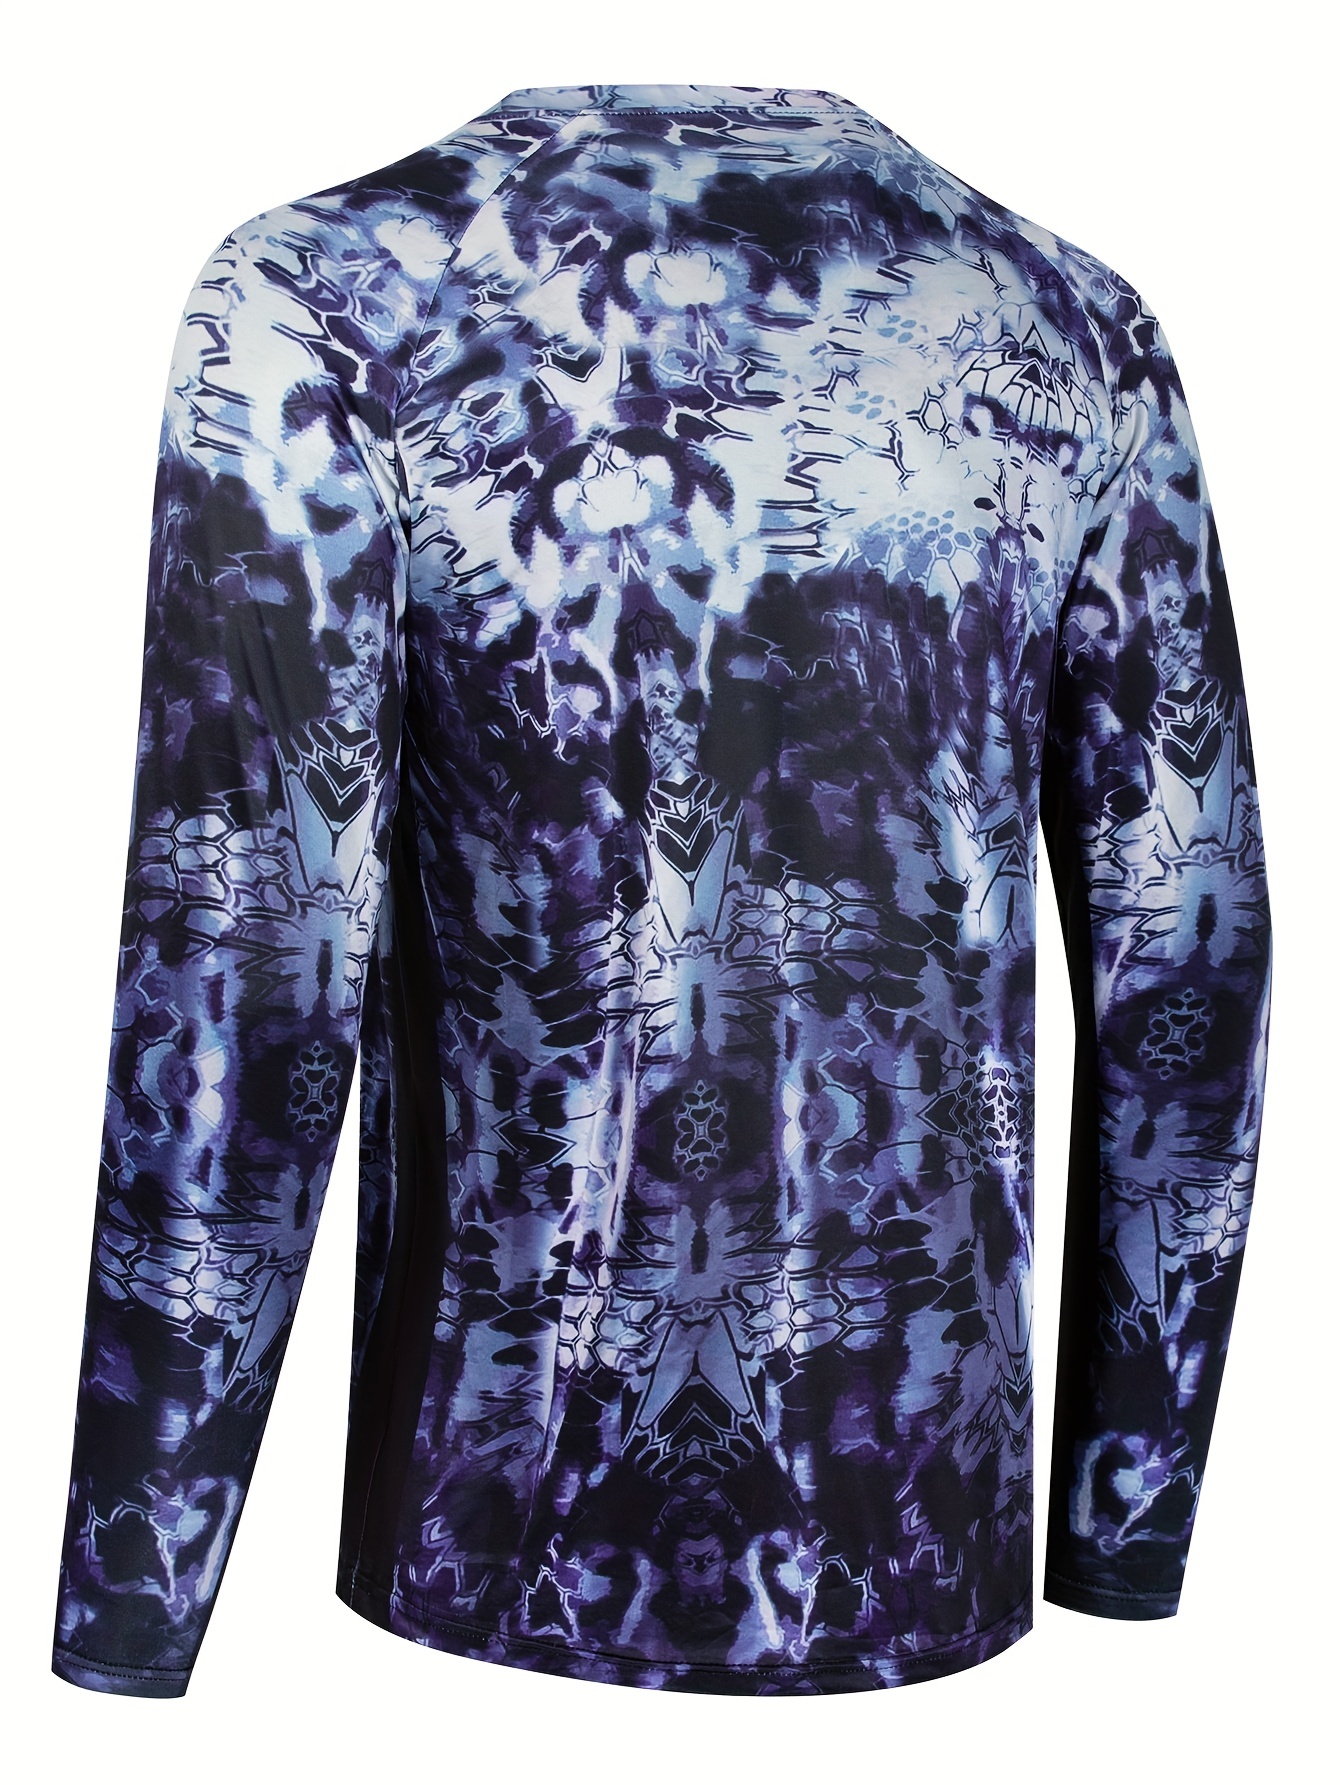 Men's Sunscreen Shirt Tie Dye Long Sleeve UPF50+ Breathable Top For Outdoor  Fishing Suit